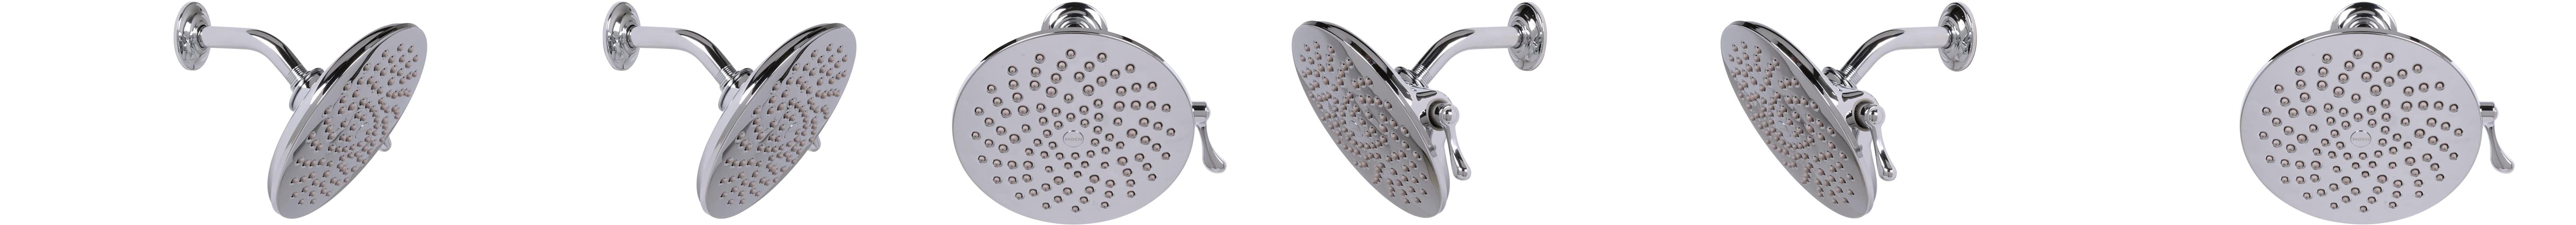 Moen Velocity Chrome Two-Function Rain Shower 8-Inch Showerhead with Immersion Technology for a H... | Amazon (US)